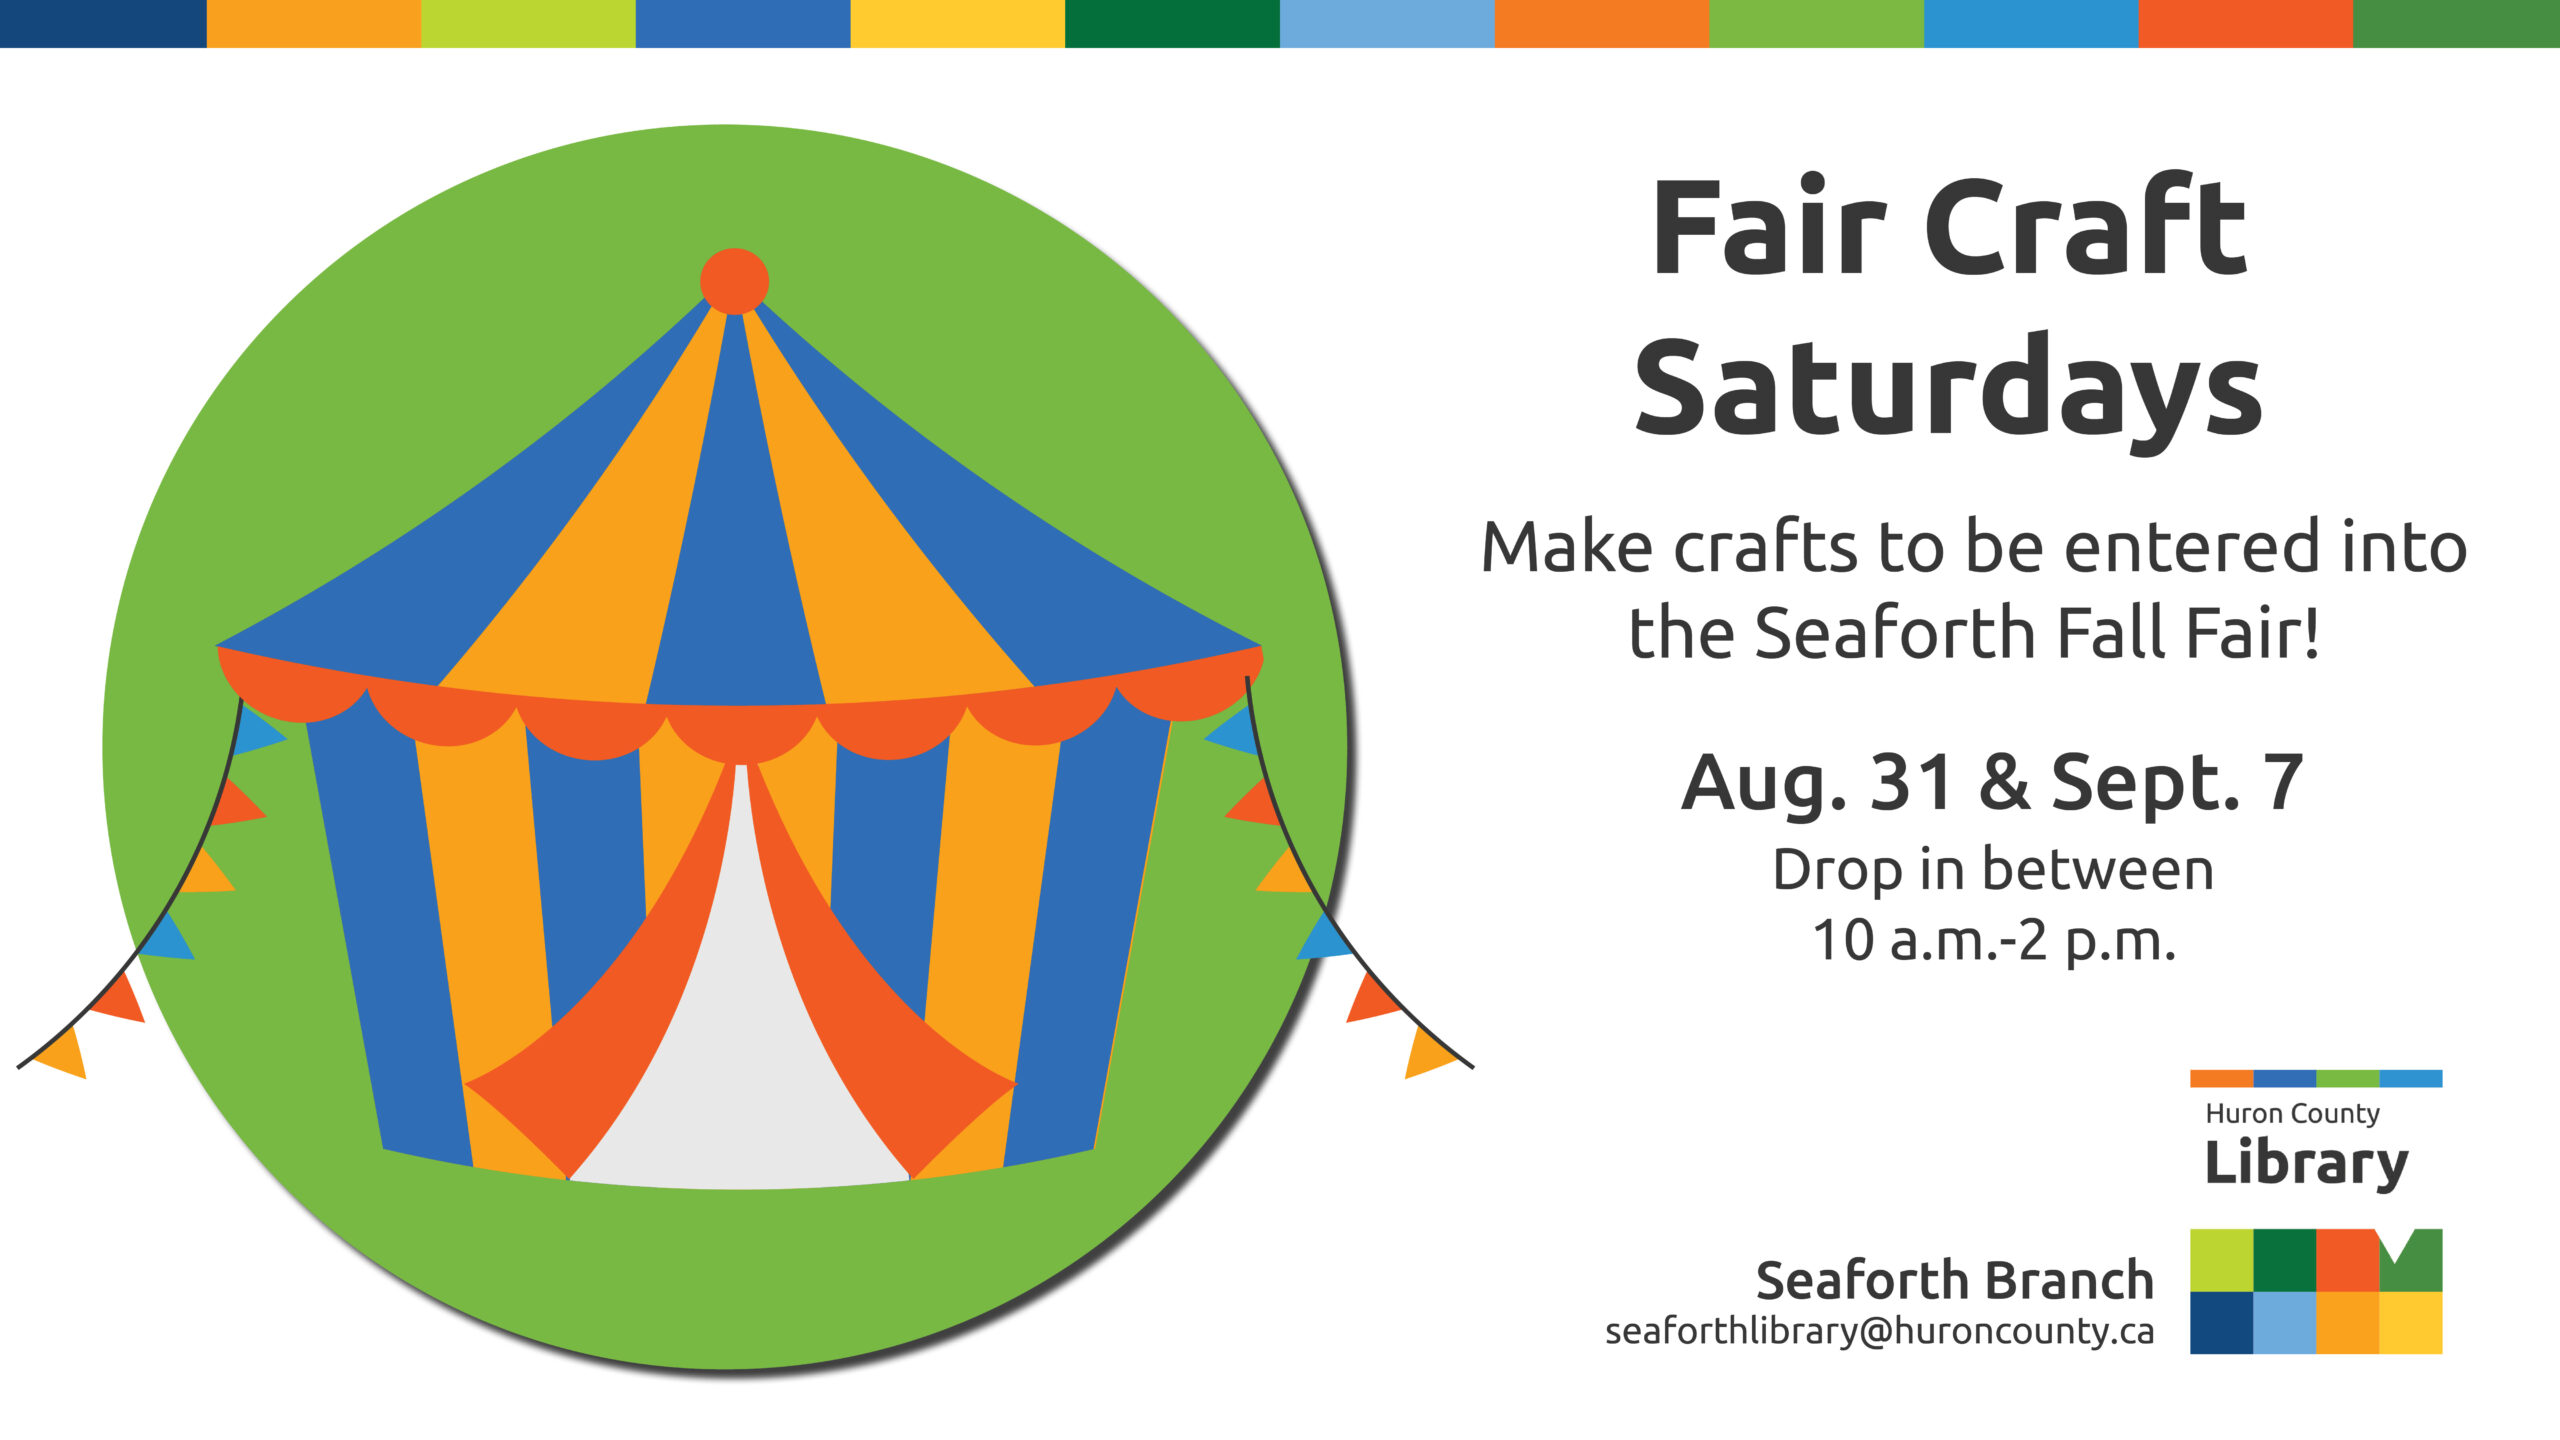 Illustration of a circus tent with text promoting Fair Craft Saturdays in Seaforth